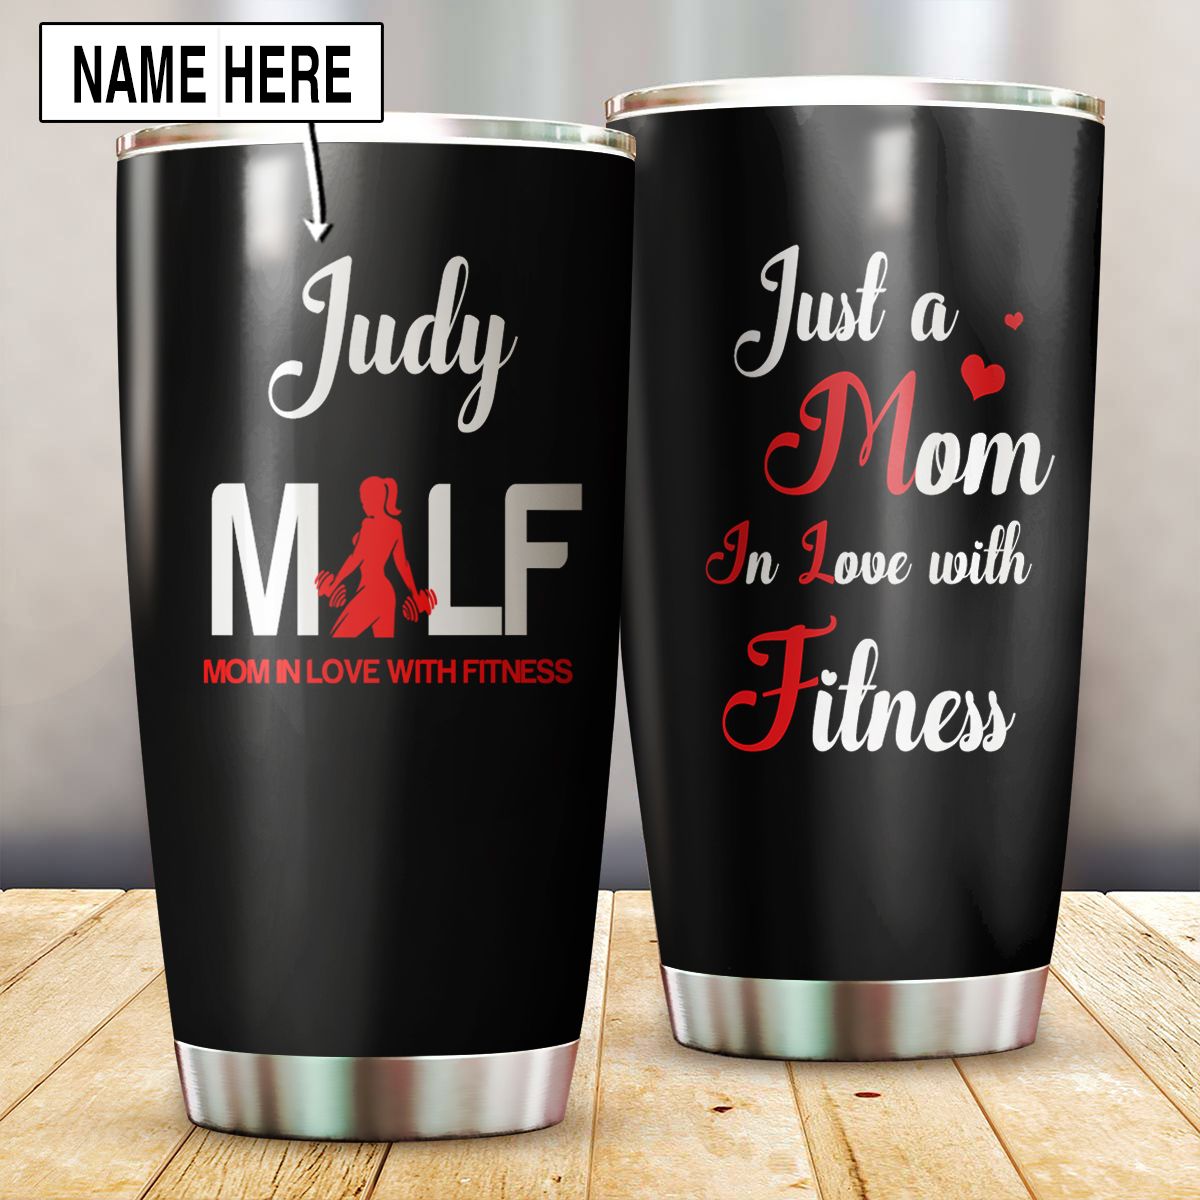 Personalized Tumbler Cup Gym Old Man Workout Gifts – Style My Pride